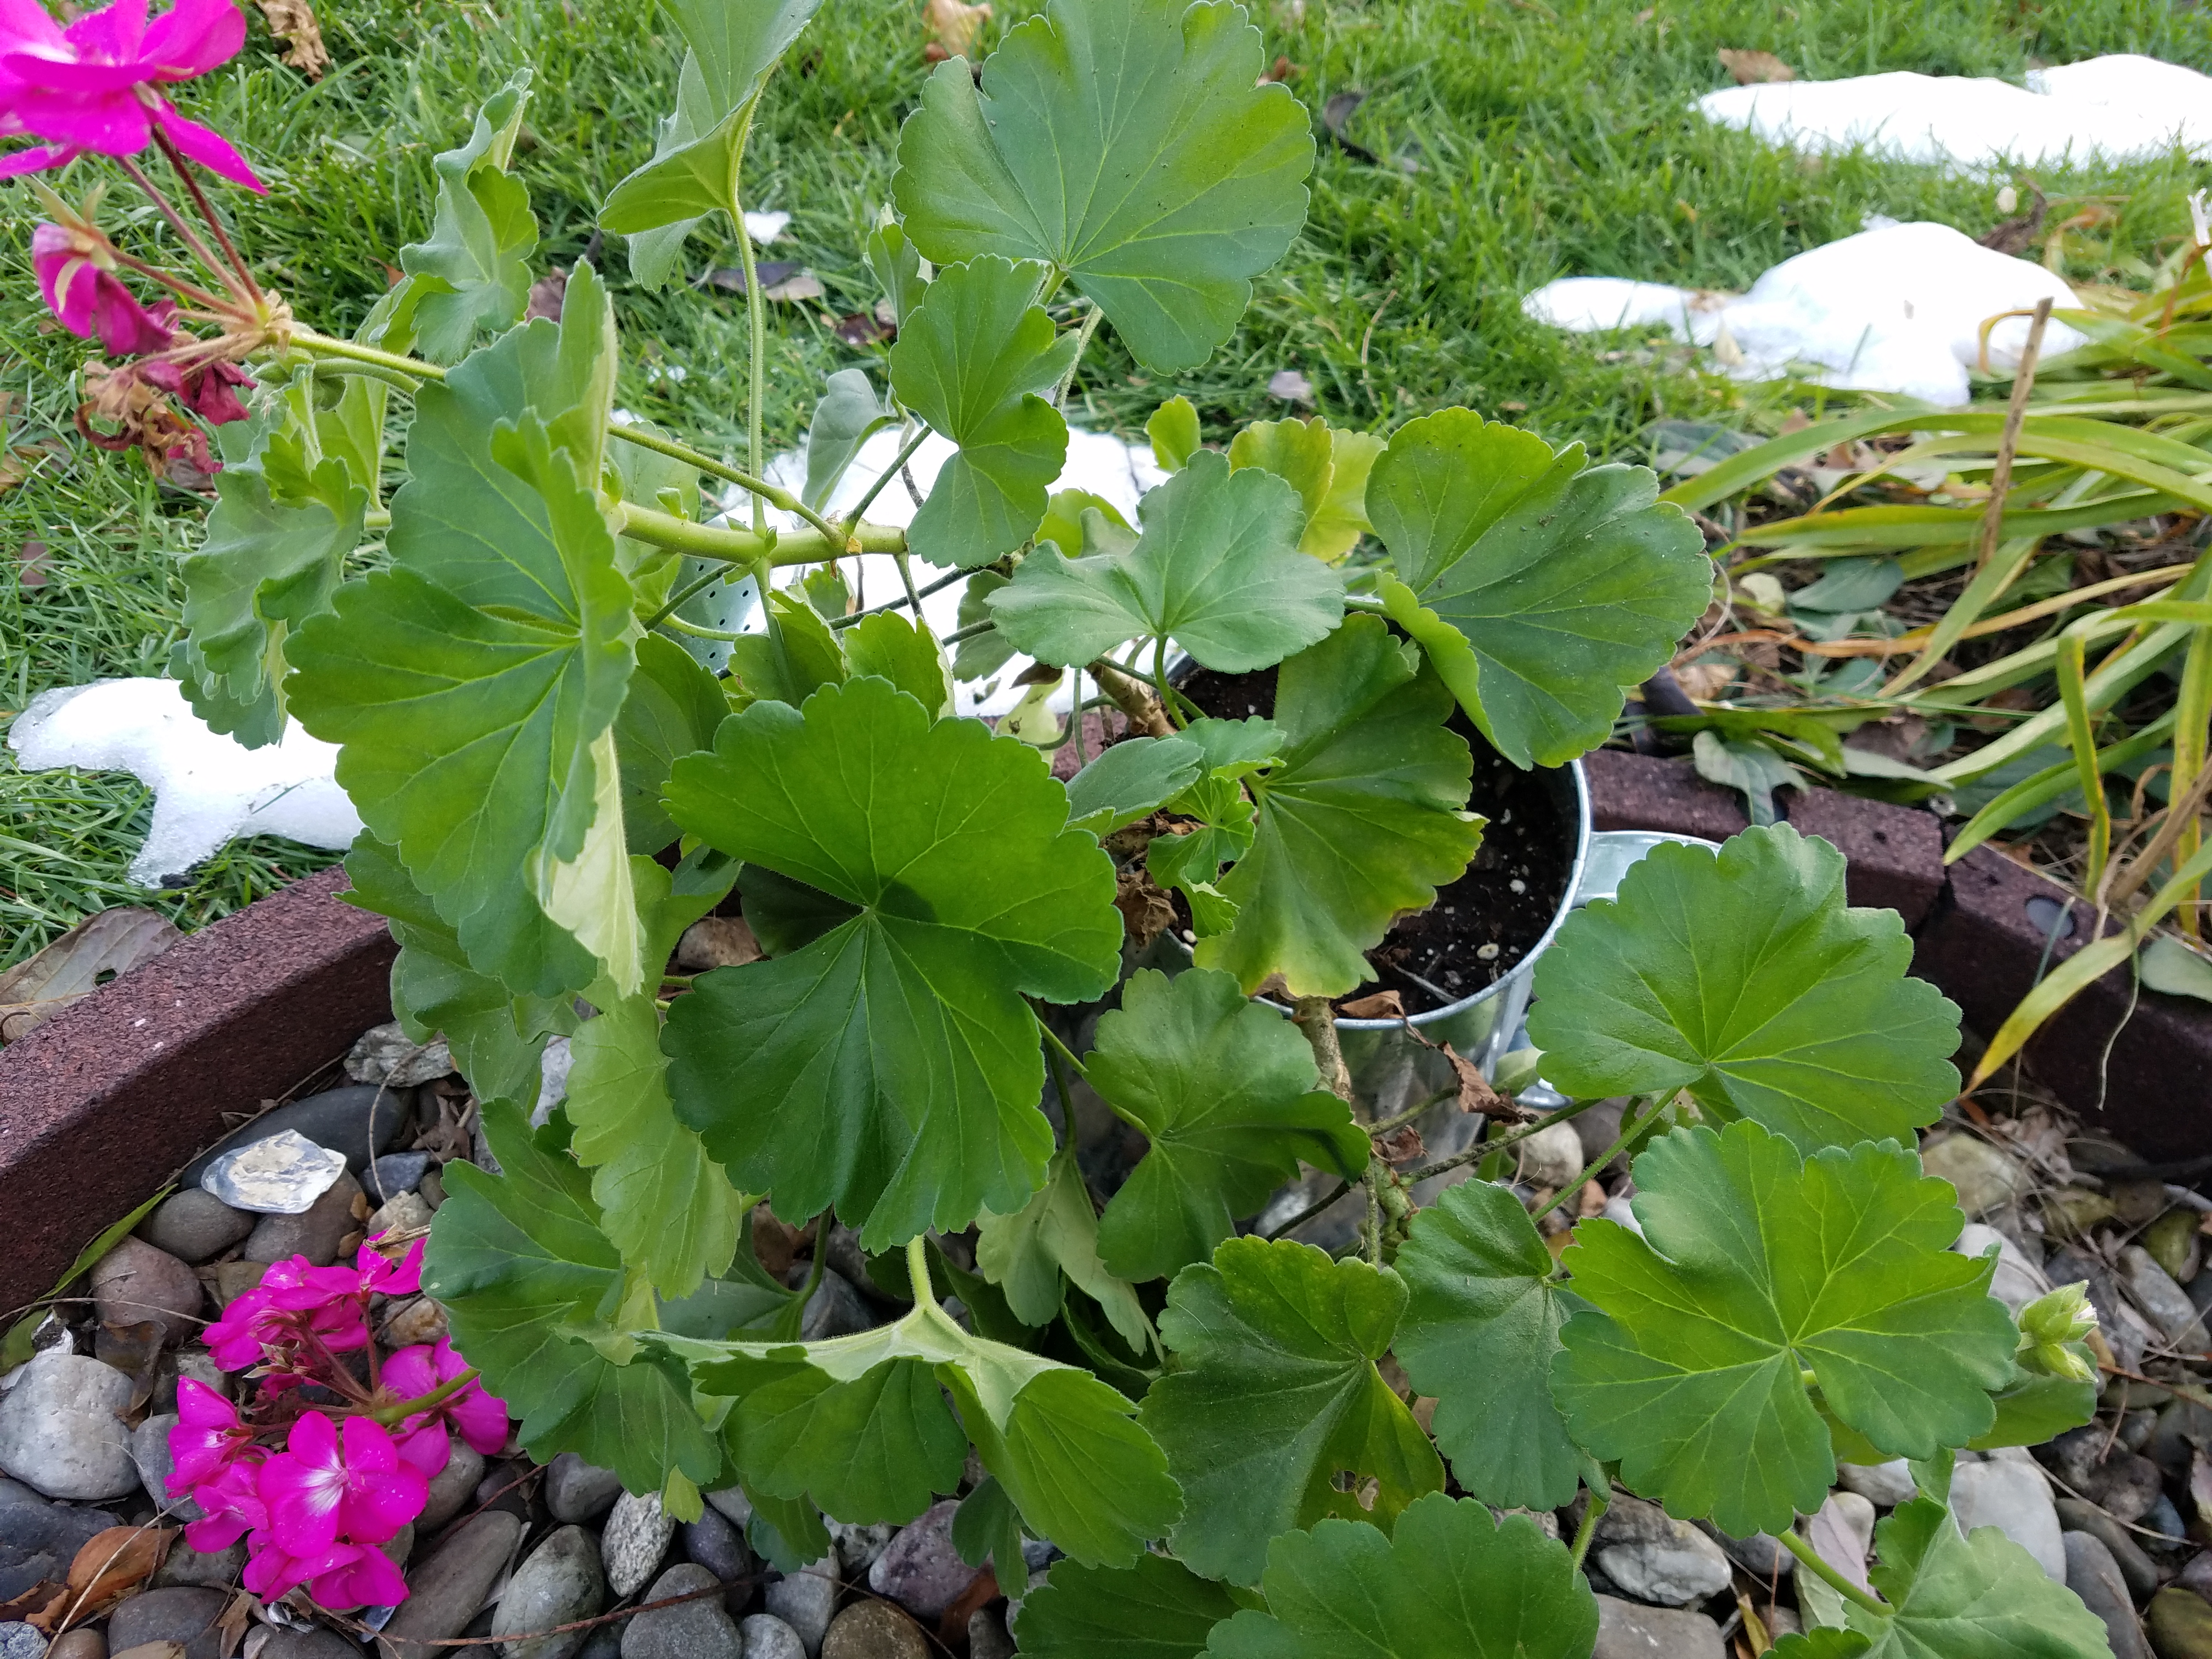 (1/2) “Been treating this Geranium all summer with foliar and root watering 1x per every few weeks. Check it out.. Nov. 11th in the New Jersey Fall with heavy frosts already...still blooming and going strong. I’m testing to see how long it goes. Blessings.” -Brian